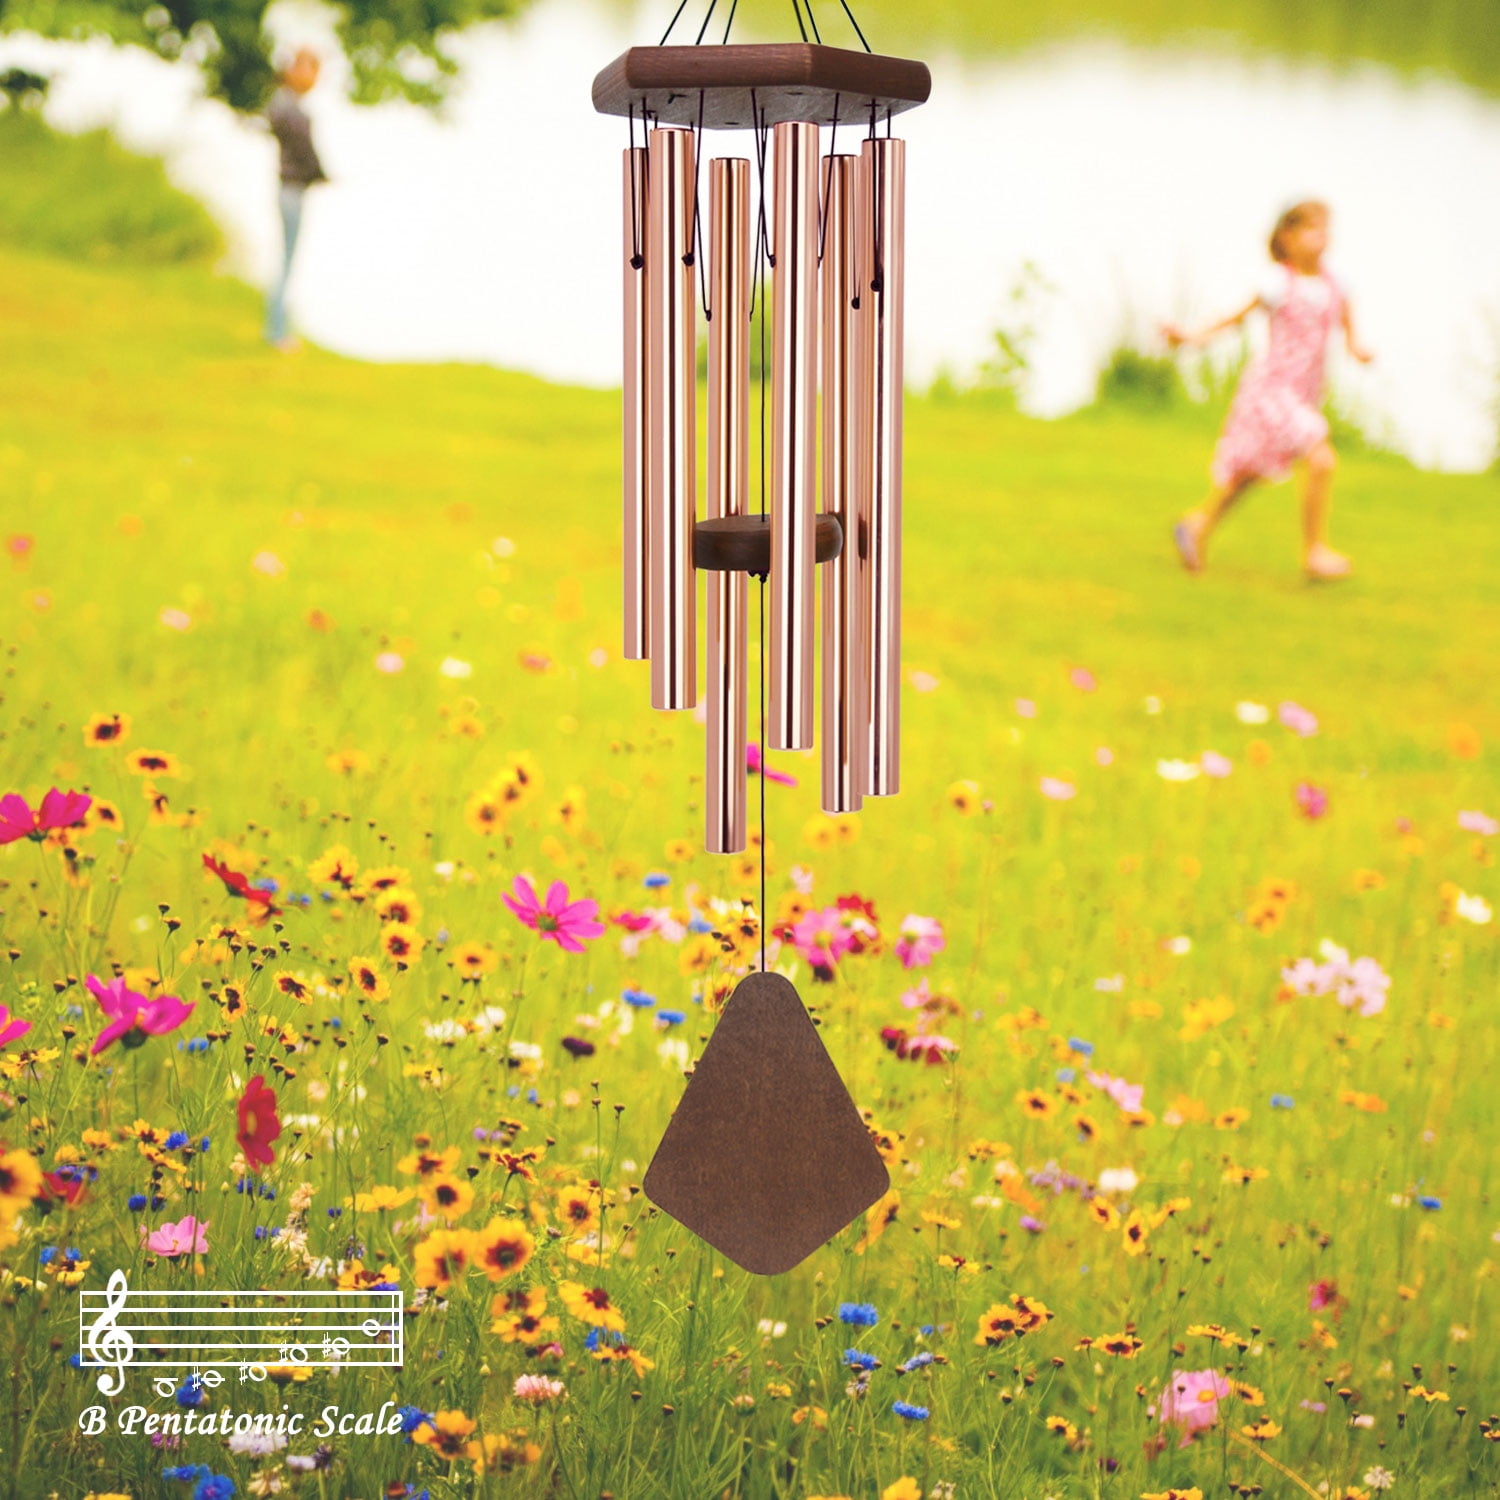 Sympathy Wind Chimes with 6 Tuned Tubes for Outdoor Indoor Patio Garden and Home Decor ASTARIN Memorial Wind Chimes Outdoor Rich Sound Silver 28 Inch Amazing Grace Wind Chimes with Relaxing 